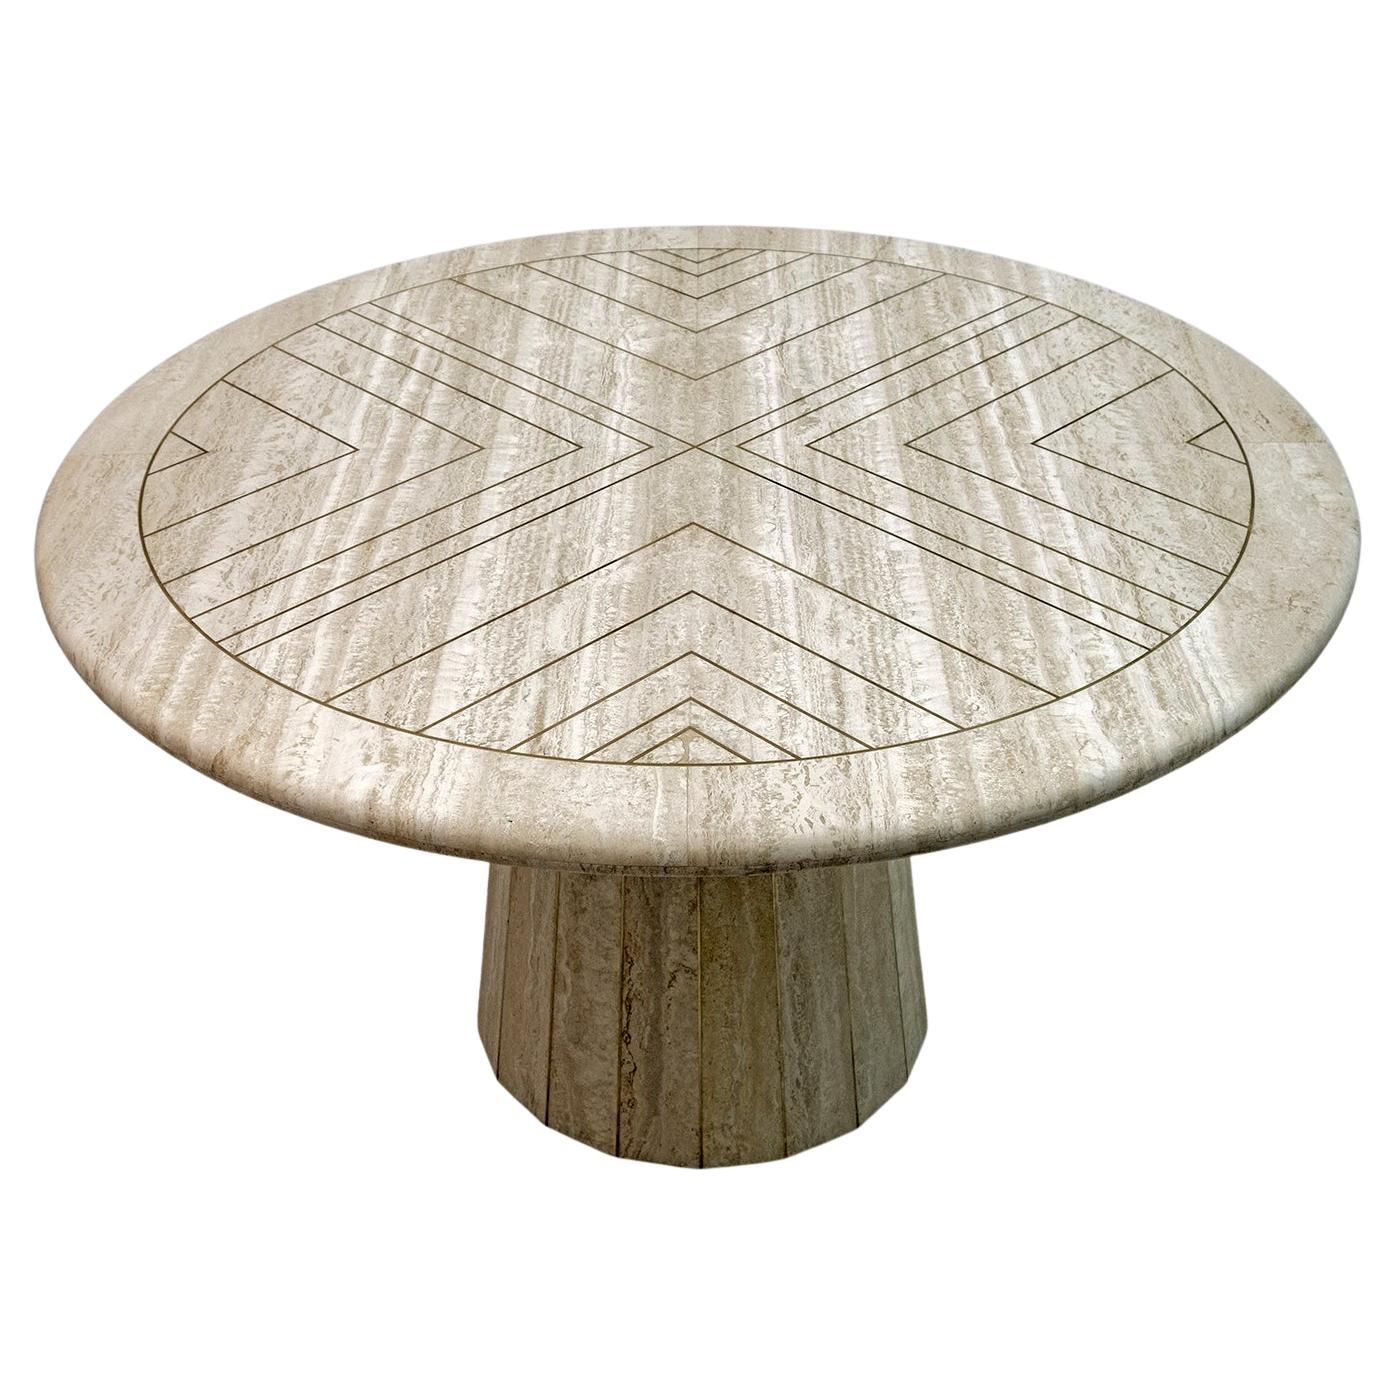 Willy Rizzo Mid-century Italian Travertine whit Brass Inlays Round Dining Table